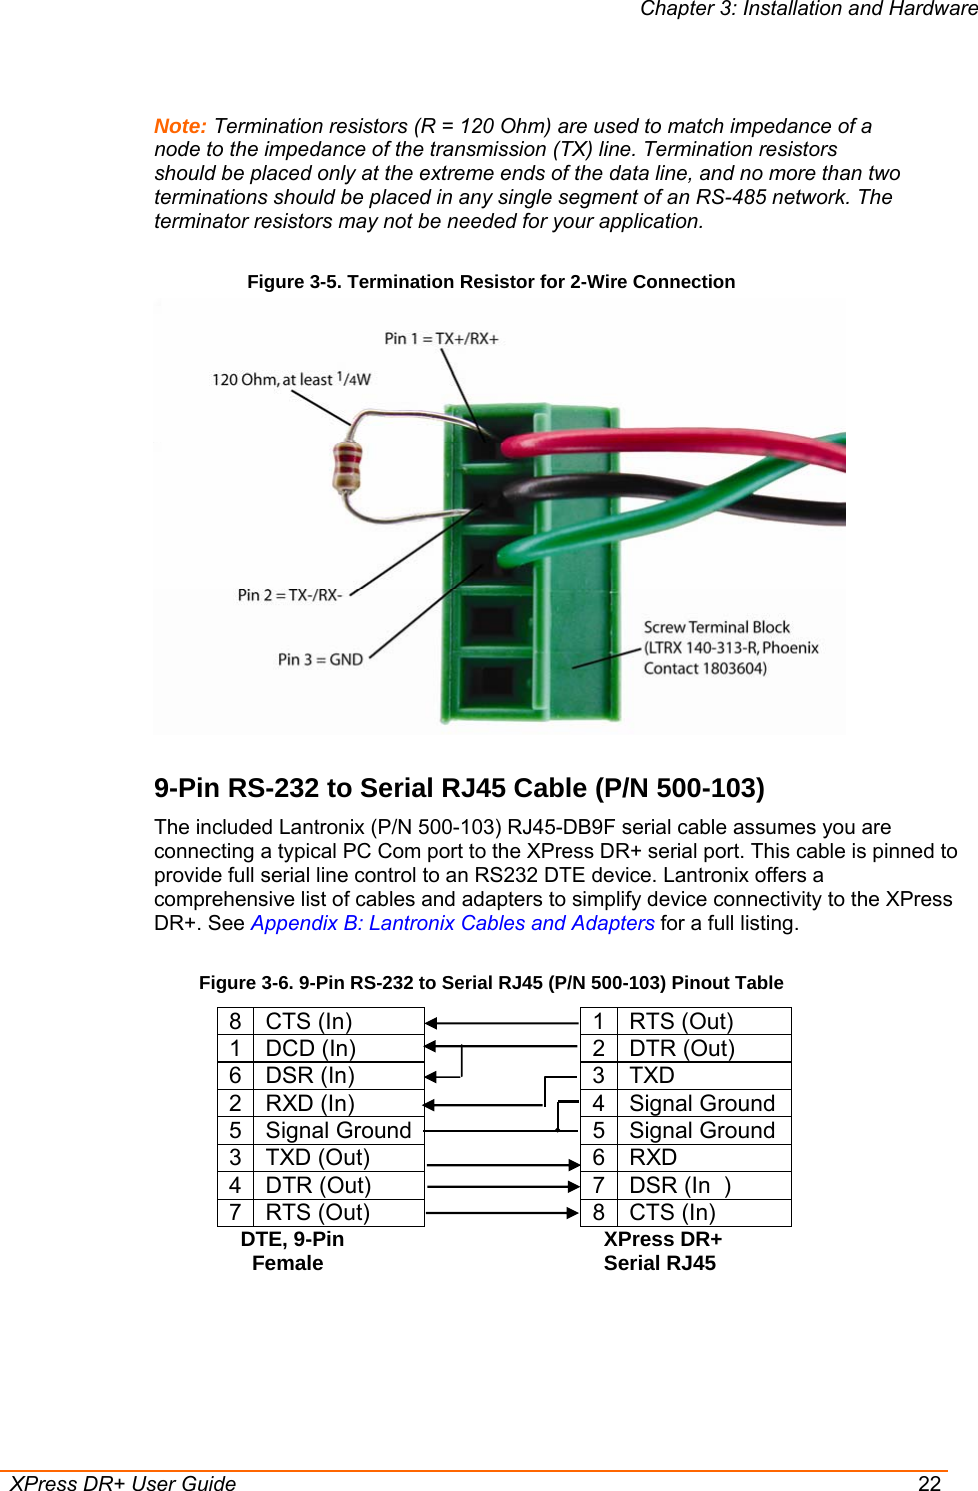 Chapter 3: Installation and Hardware  XPress DR+ User Guide  22  Note: Termination resistors (R = 120 Ohm) are used to match impedance of a node to the impedance of the transmission (TX) line. Termination resistors should be placed only at the extreme ends of the data line, and no more than two terminations should be placed in any single segment of an RS-485 network. The terminator resistors may not be needed for your application.  Figure 3-5. Termination Resistor for 2-Wire Connection  9-Pin RS-232 to Serial RJ45 Cable (P/N 500-103)  The included Lantronix (P/N 500-103) RJ45-DB9F serial cable assumes you are connecting a typical PC Com port to the XPress DR+ serial port. This cable is pinned to provide full serial line control to an RS232 DTE device. Lantronix offers a comprehensive list of cables and adapters to simplify device connectivity to the XPress DR+. See Appendix B: Lantronix Cables and Adapters for a full listing. Figure 3-6. 9-Pin RS-232 to Serial RJ45 (P/N 500-103) Pinout Table 8 CTS (In)        1 RTS (Out) 1 DCD (In)        2 DTR (Out) 6 DSR (In)        3 TXD 2 RXD (In)        4 Signal Ground 5 Signal Ground       5 Signal Ground 3 TXD (Out)        6 RXD 4 DTR (Out)        7 DSR (In  ) 7 RTS (Out)        8 CTS (In)   DTE, 9-Pin        XPress DR+     Female        Serial RJ45    